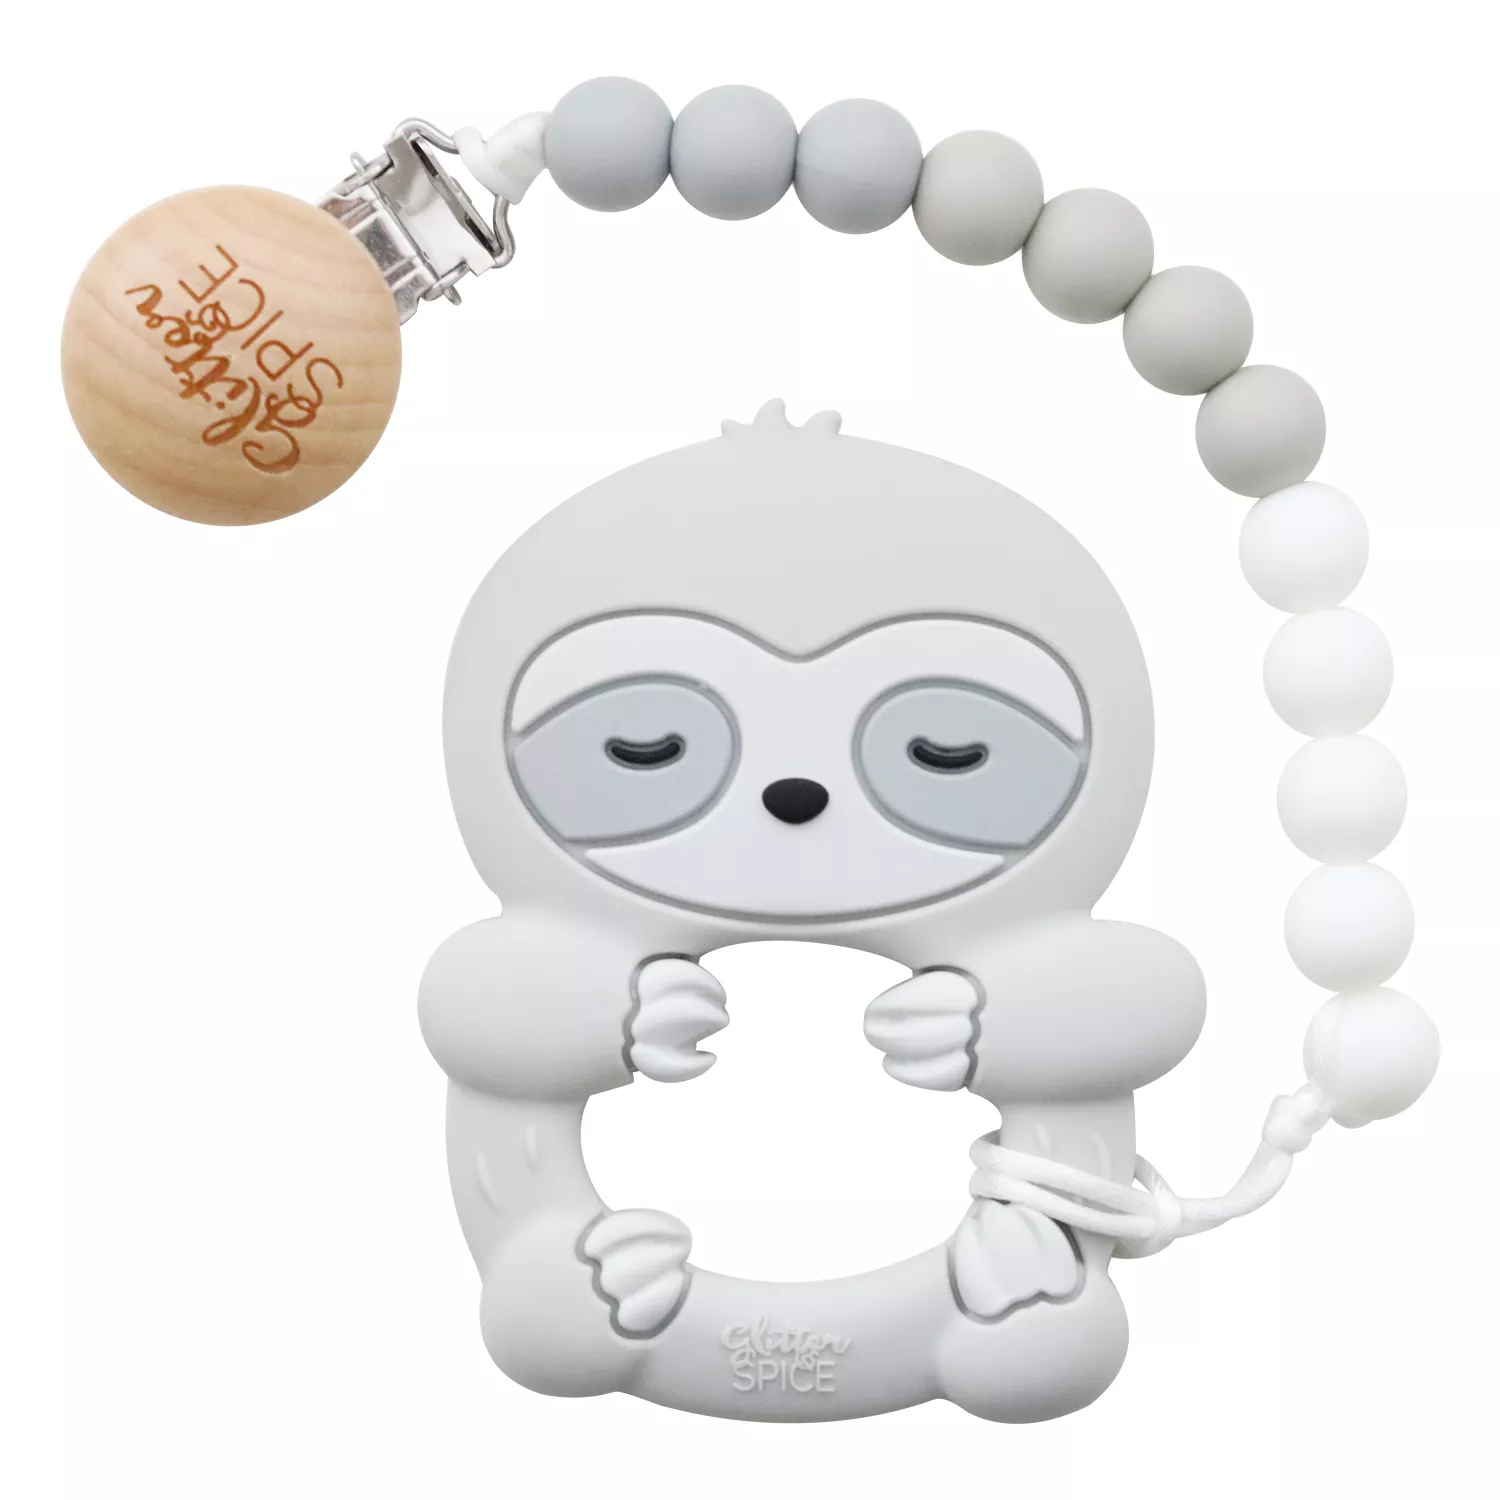 Glitter & Spice Sloth Silicone Teether